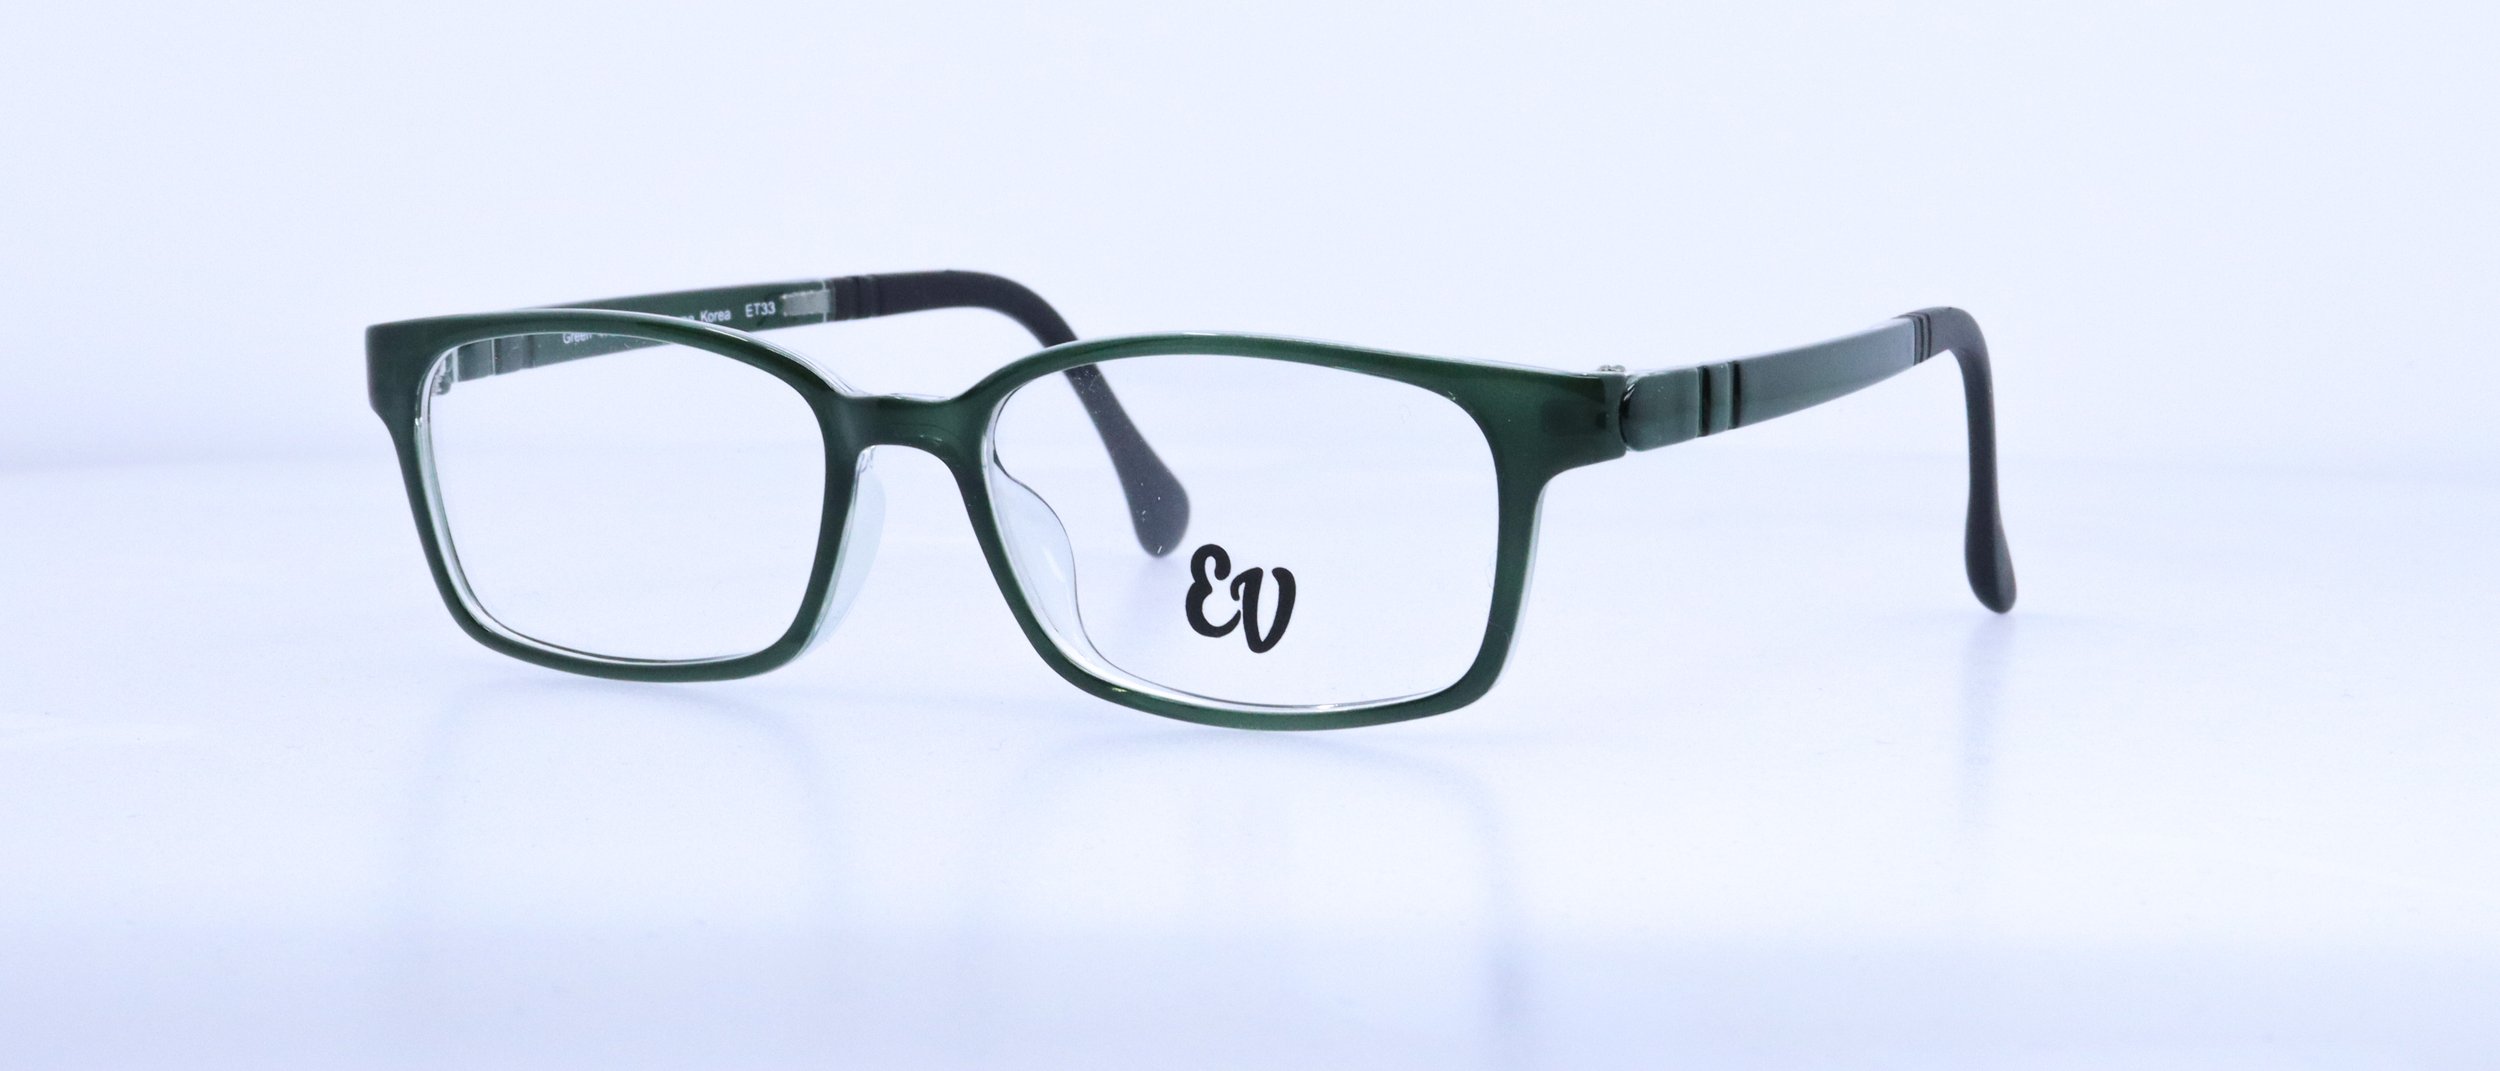  NEW!!! EV303: 47-15-128, Available in Green or Grey 